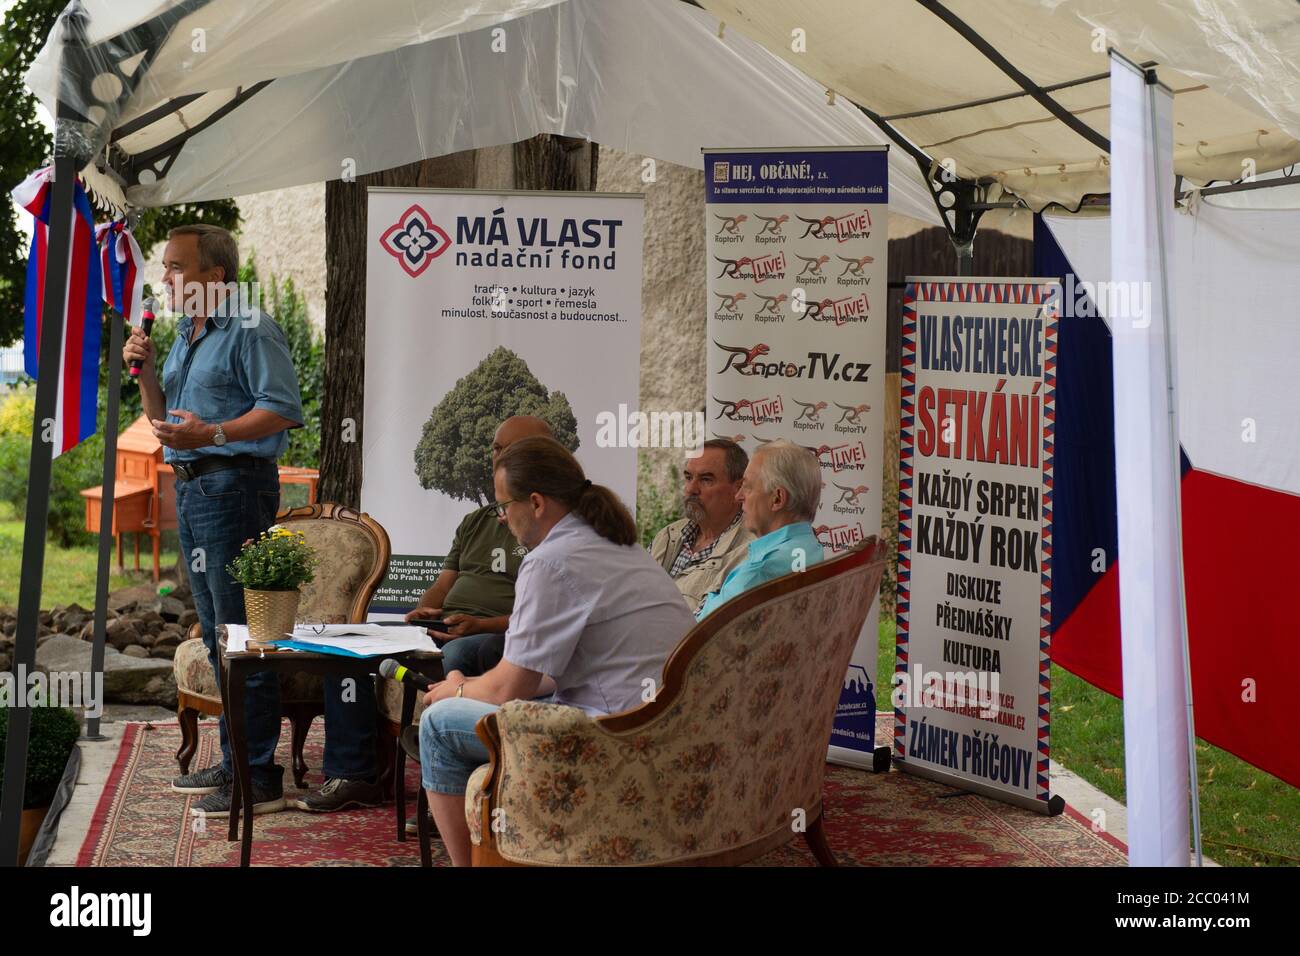 Pricovy, Czech Republic. 15th Aug, 2020. JIRI KOBZA of SPD speaks during the 2nd annual Patriotic meeting in Pricovy chateau, Czech Republic, August 15, 2020. Credit: Vaclav Pancer/CTK Photo/Alamy Live News Stock Photo